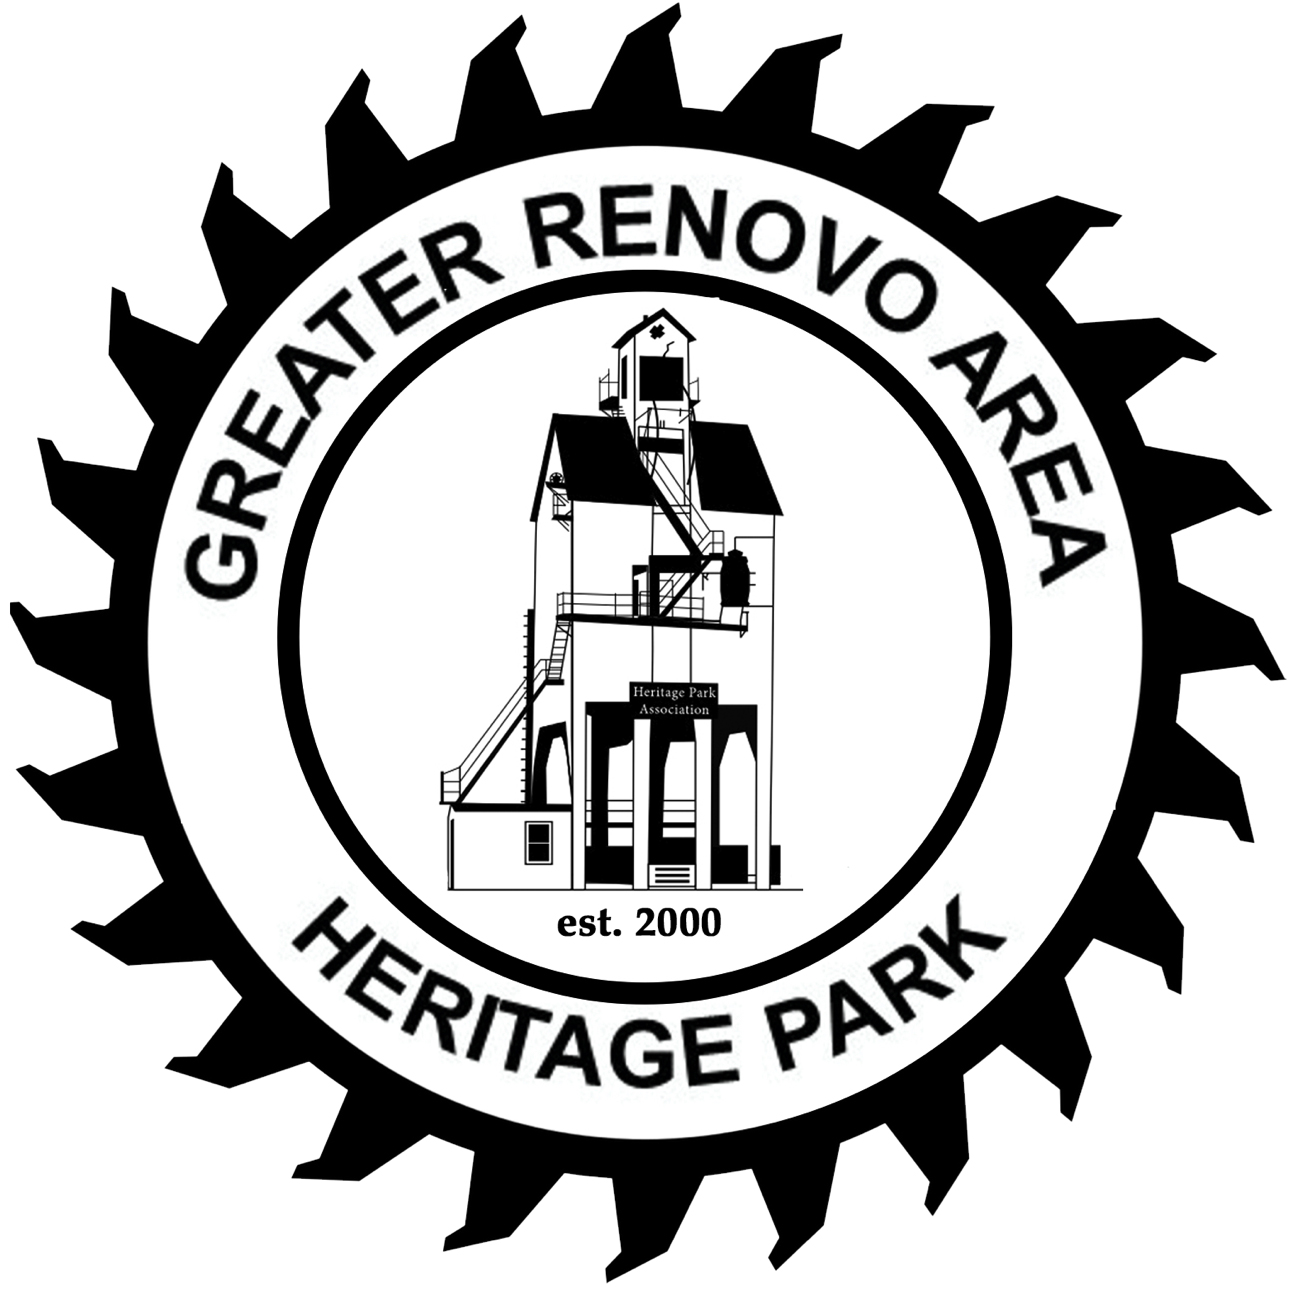 The Greater Renovo Area Heritage Park | 